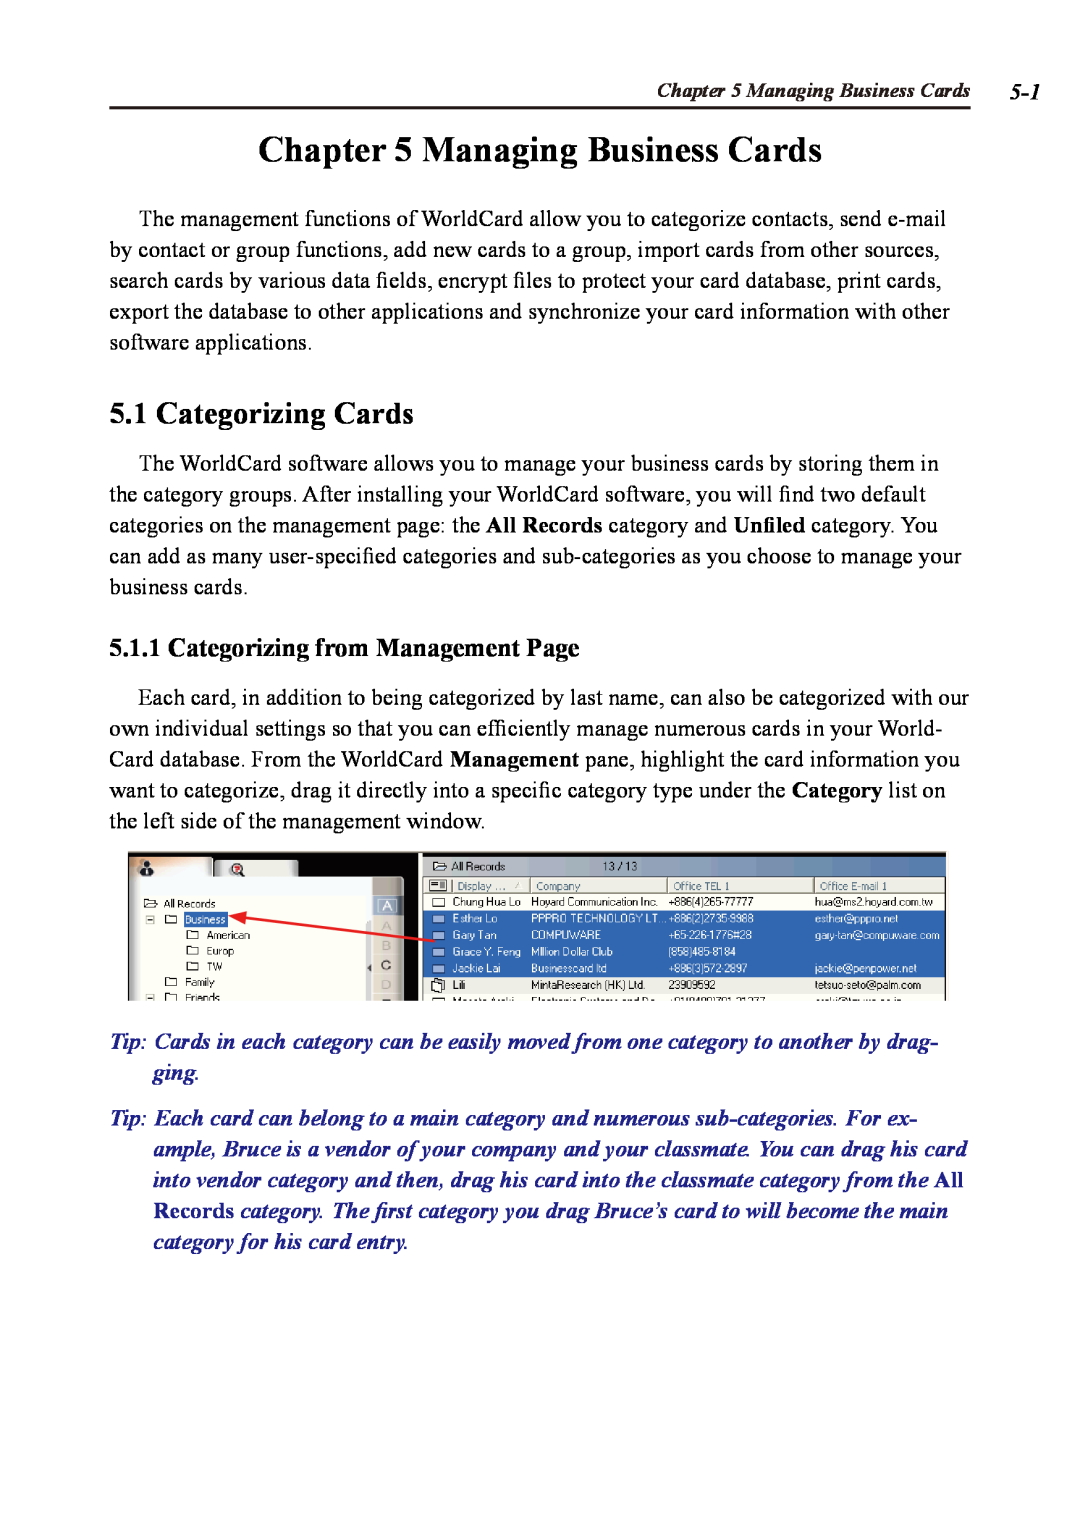 Penpower duet 2 user manual Managing Business Cards, Categorizing Cards, Categorizing from Management Page 